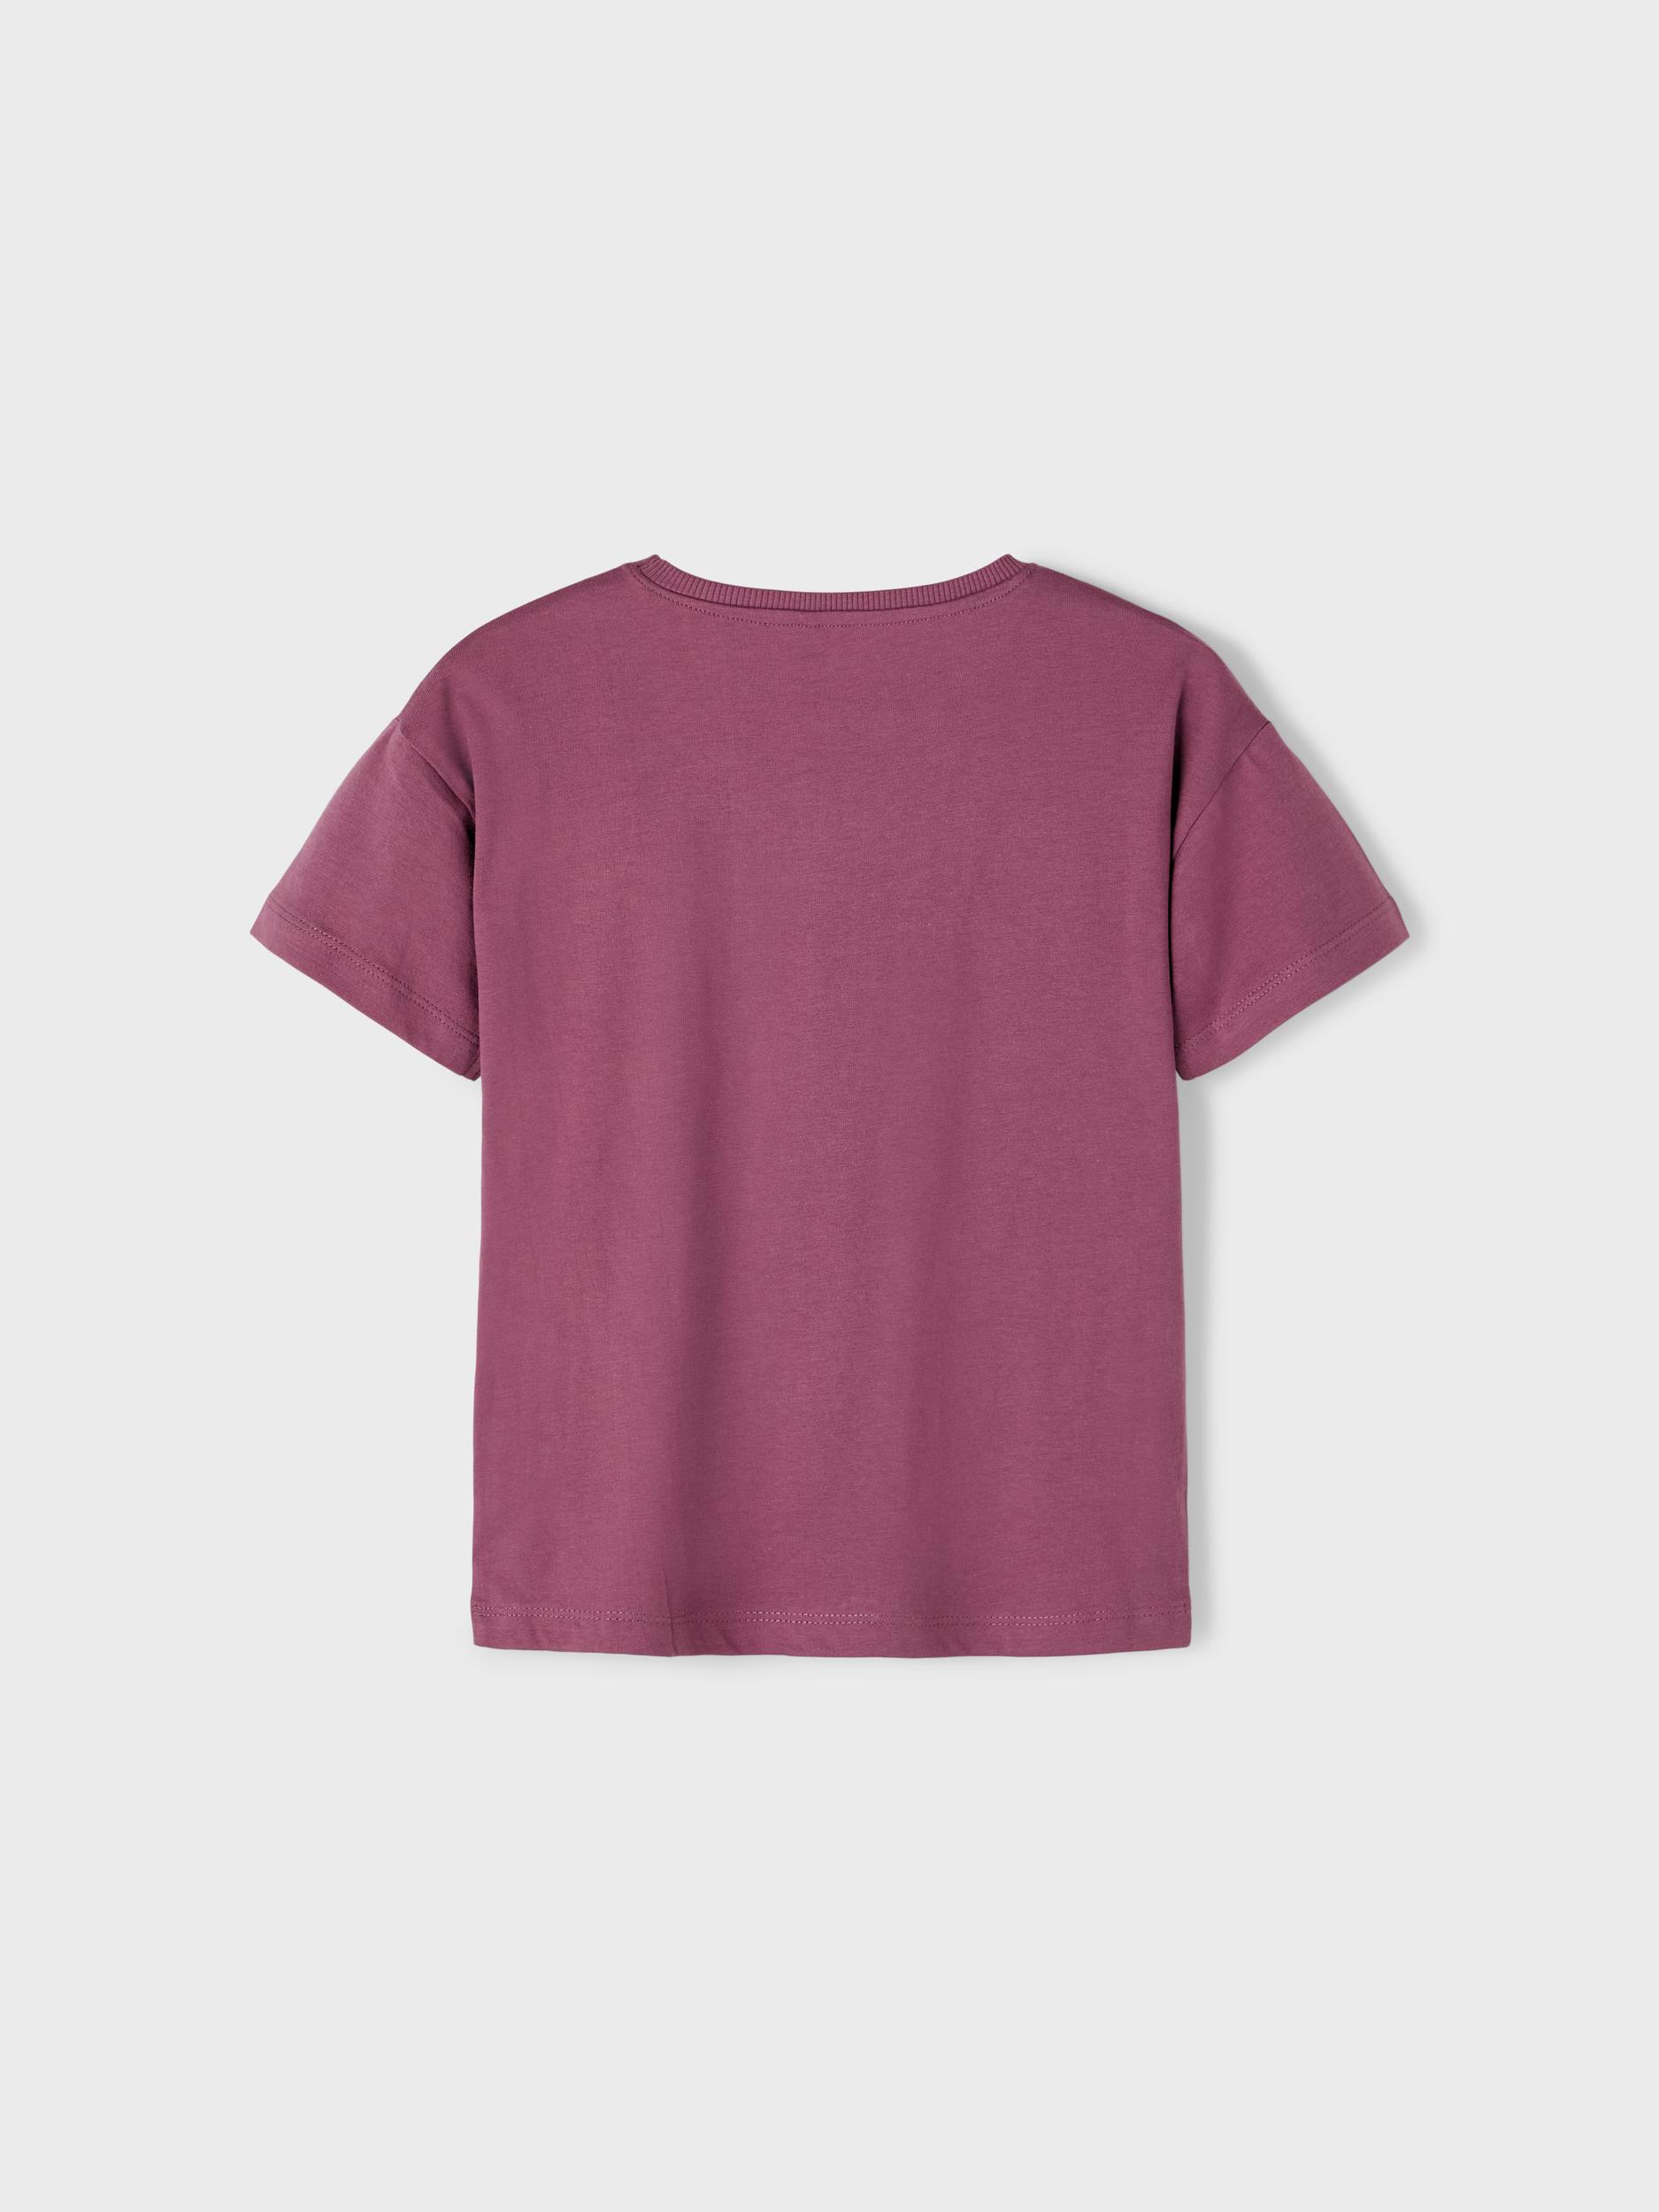  Tully T-Shirt, Chrushed Berry, 146-152 cm